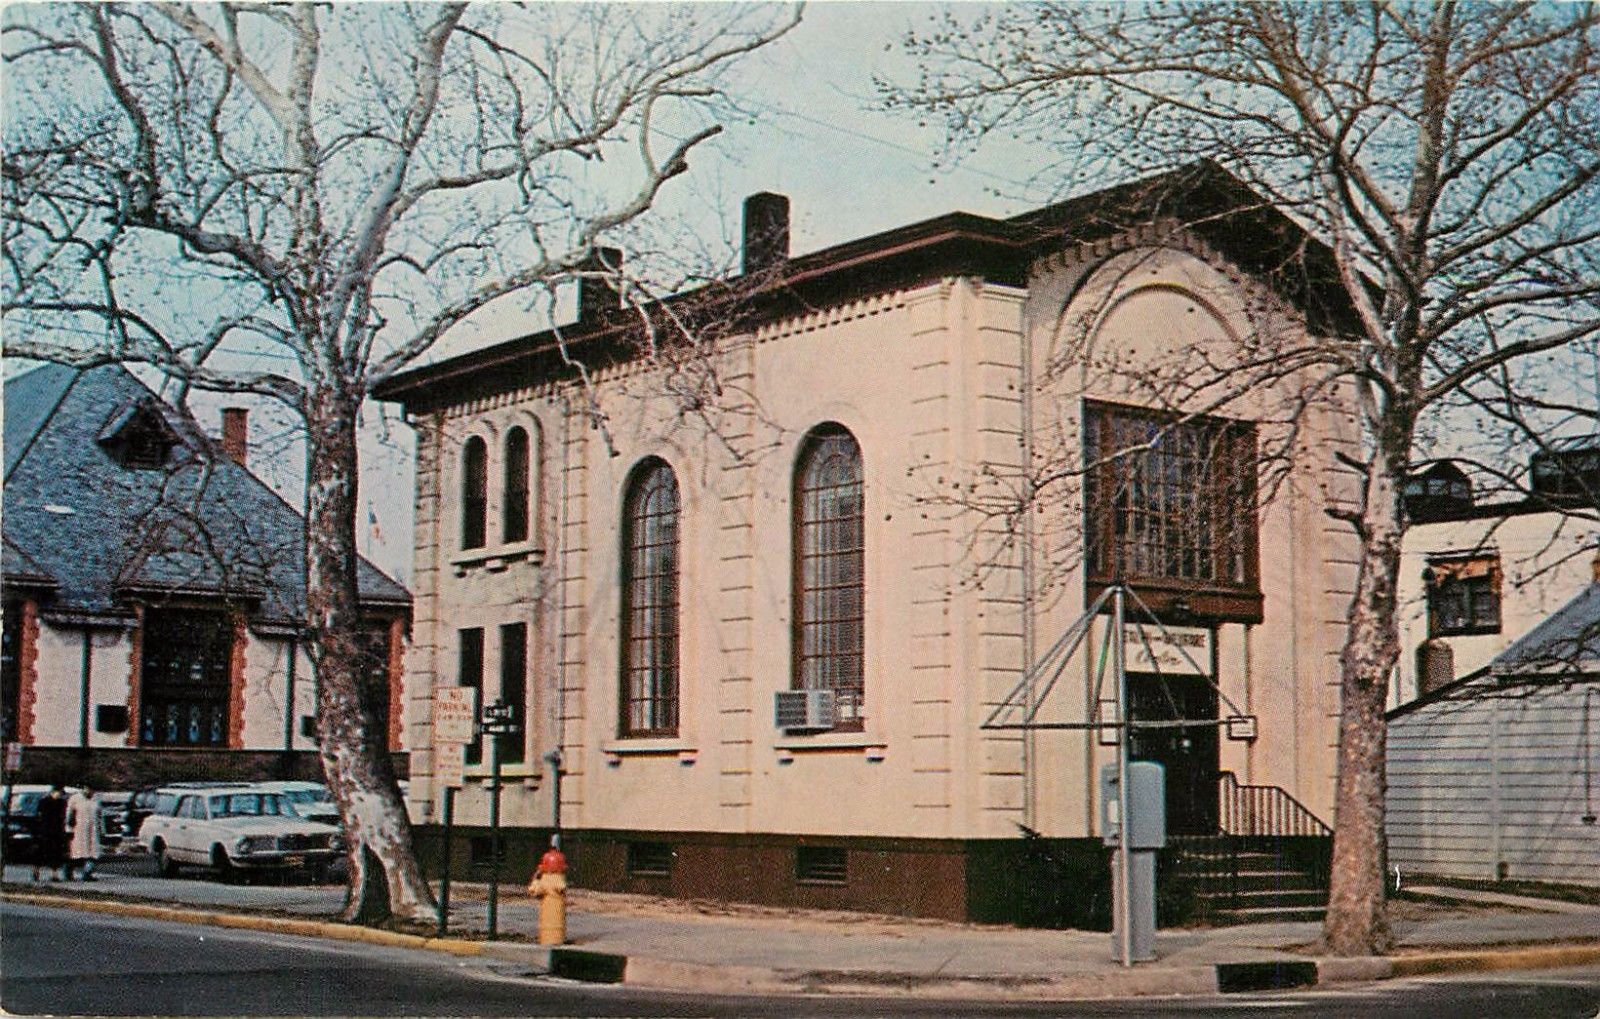 first bank of new jersey